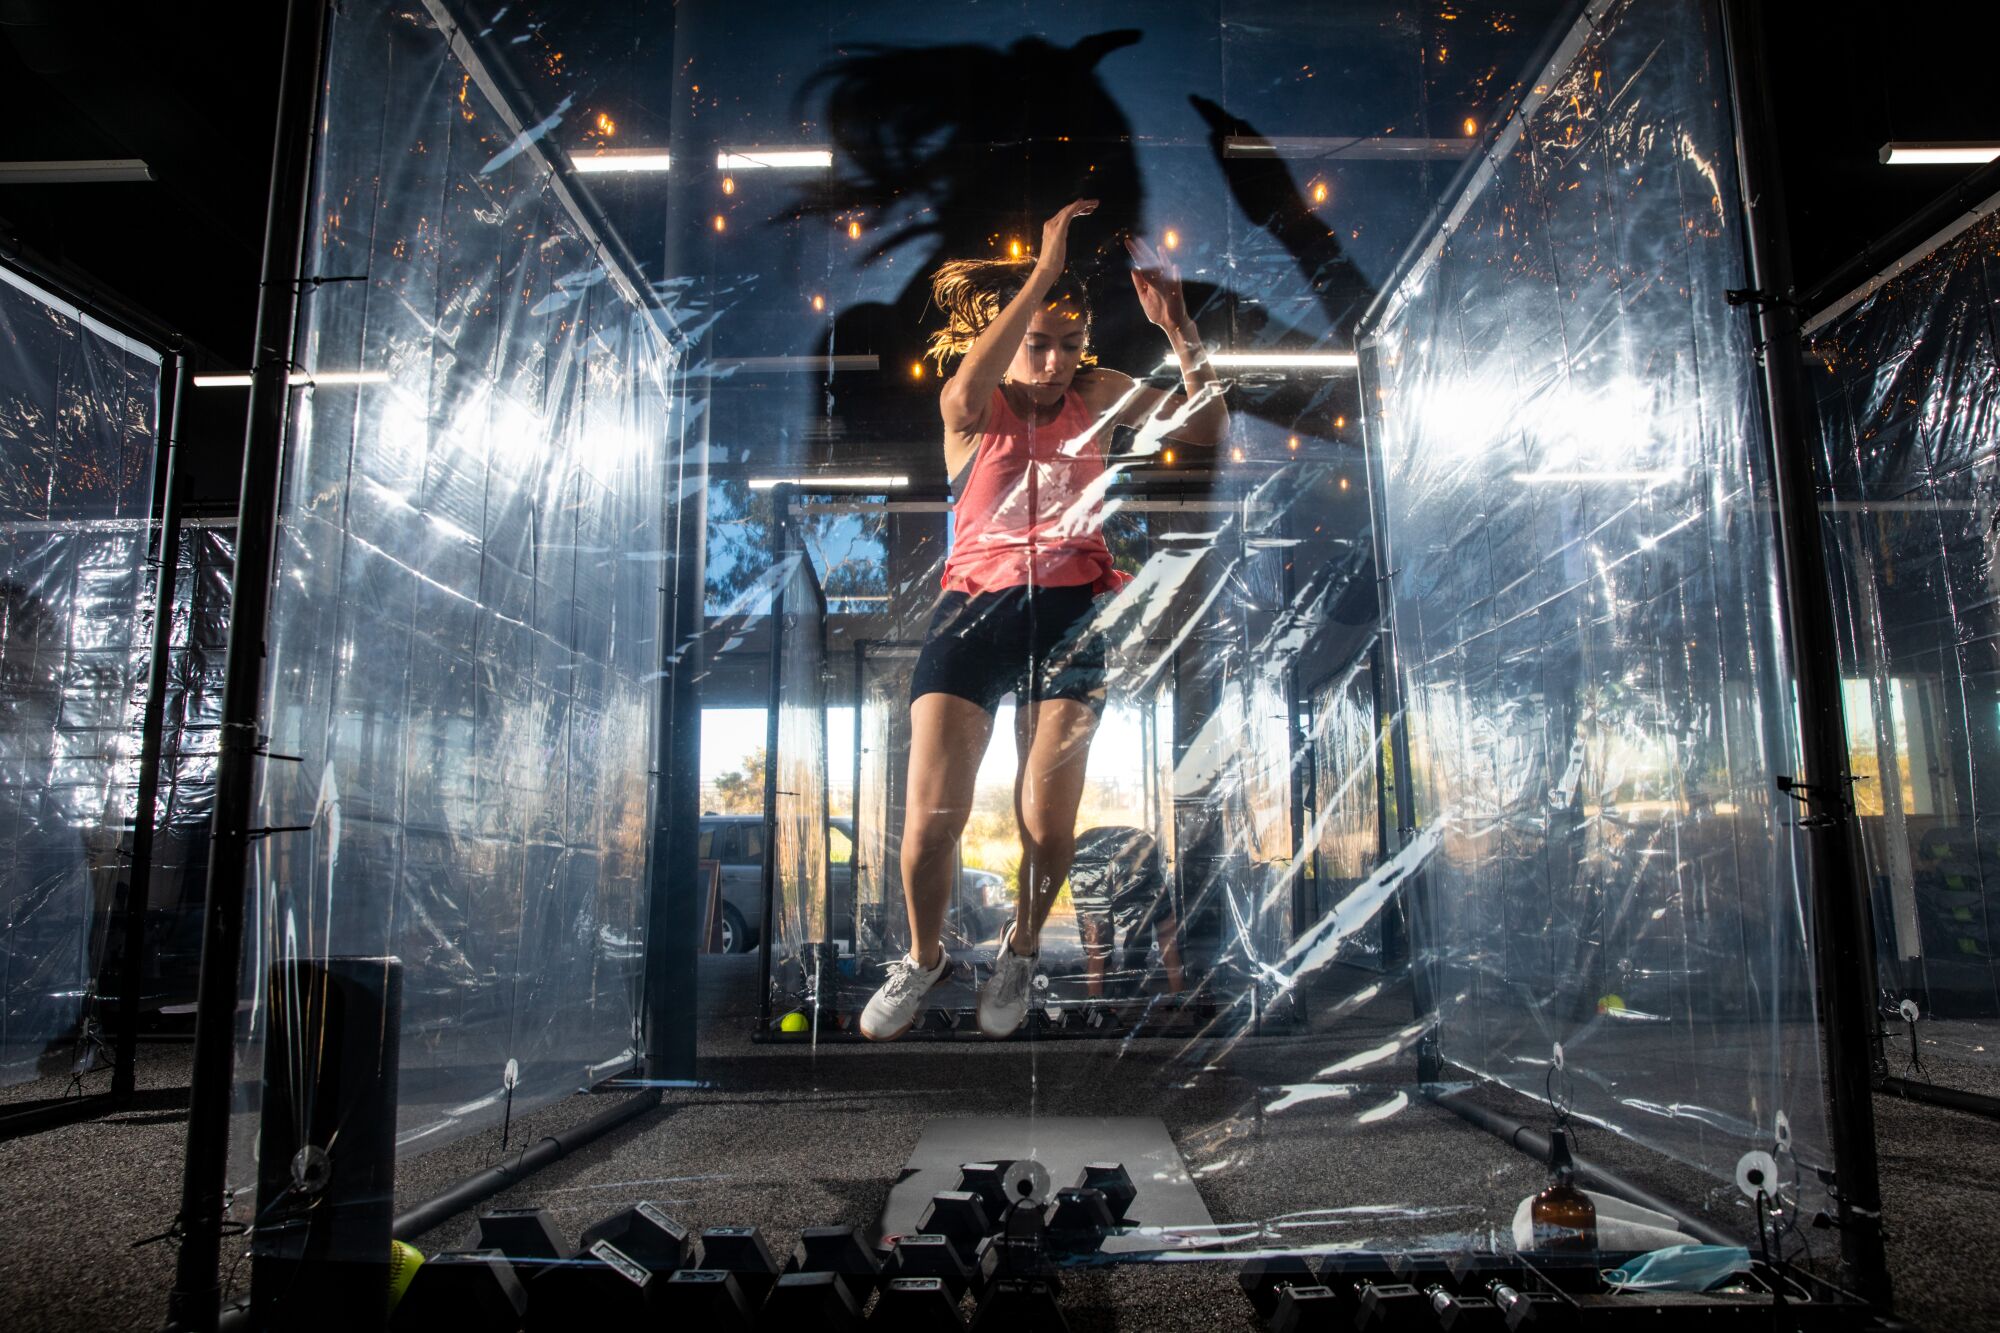 A woman jumps while exercising inside a transparent plastic pod in a gym